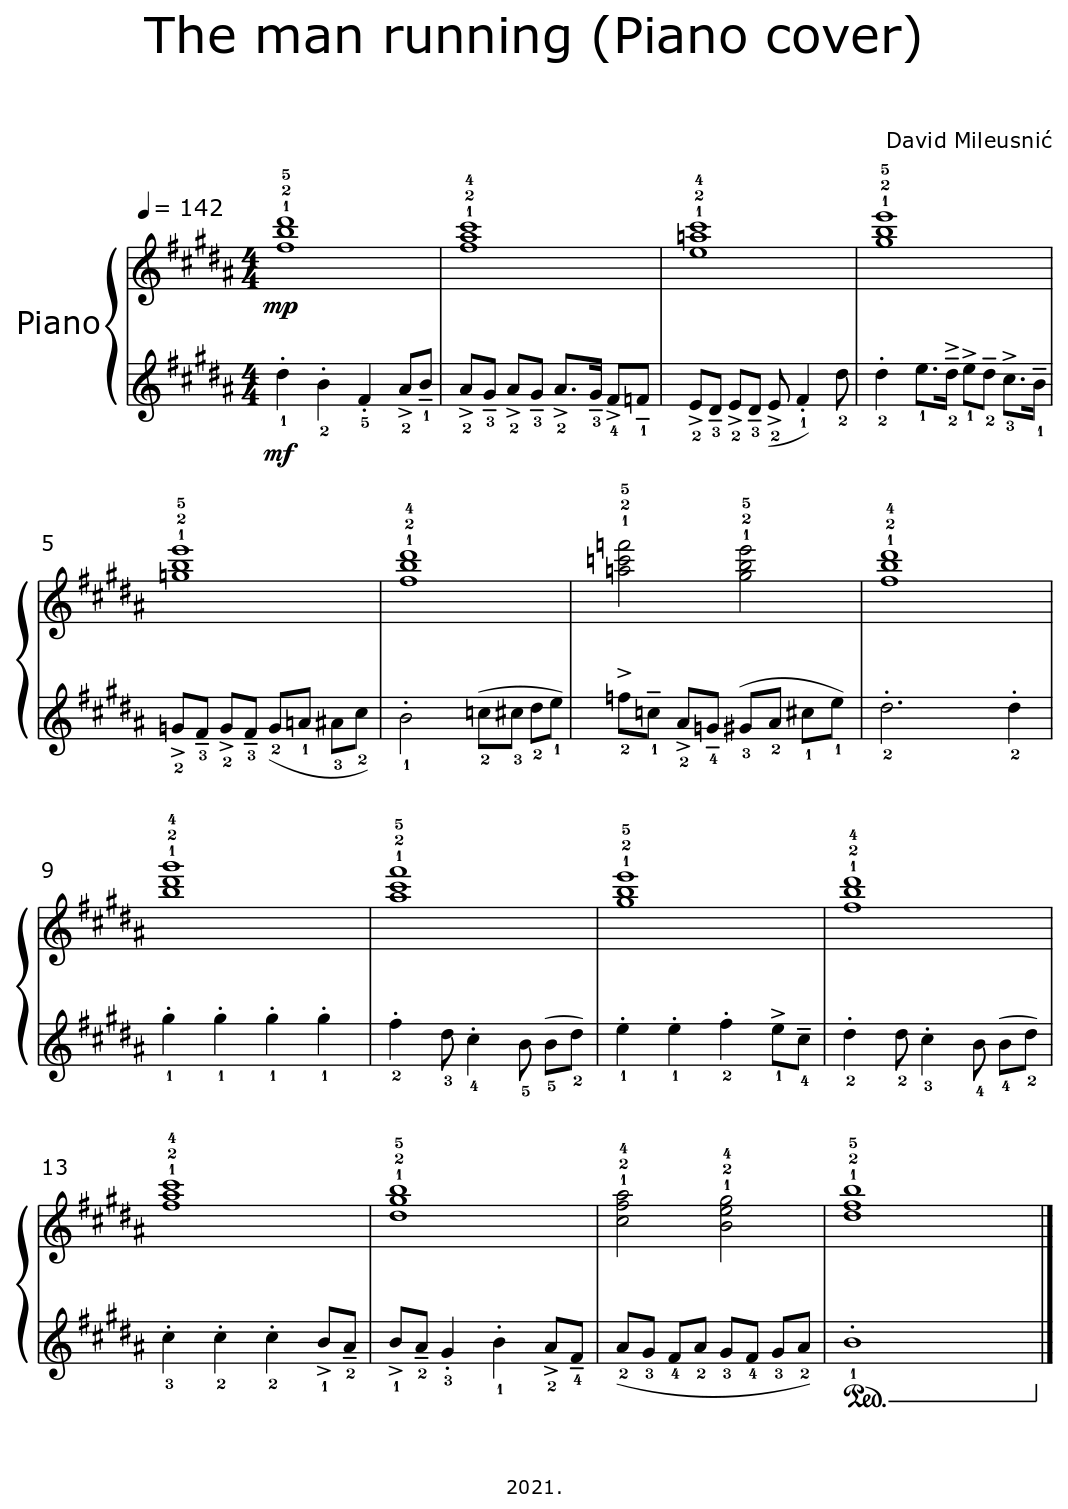 The man running (Piano cover) - Sheet music for Piano